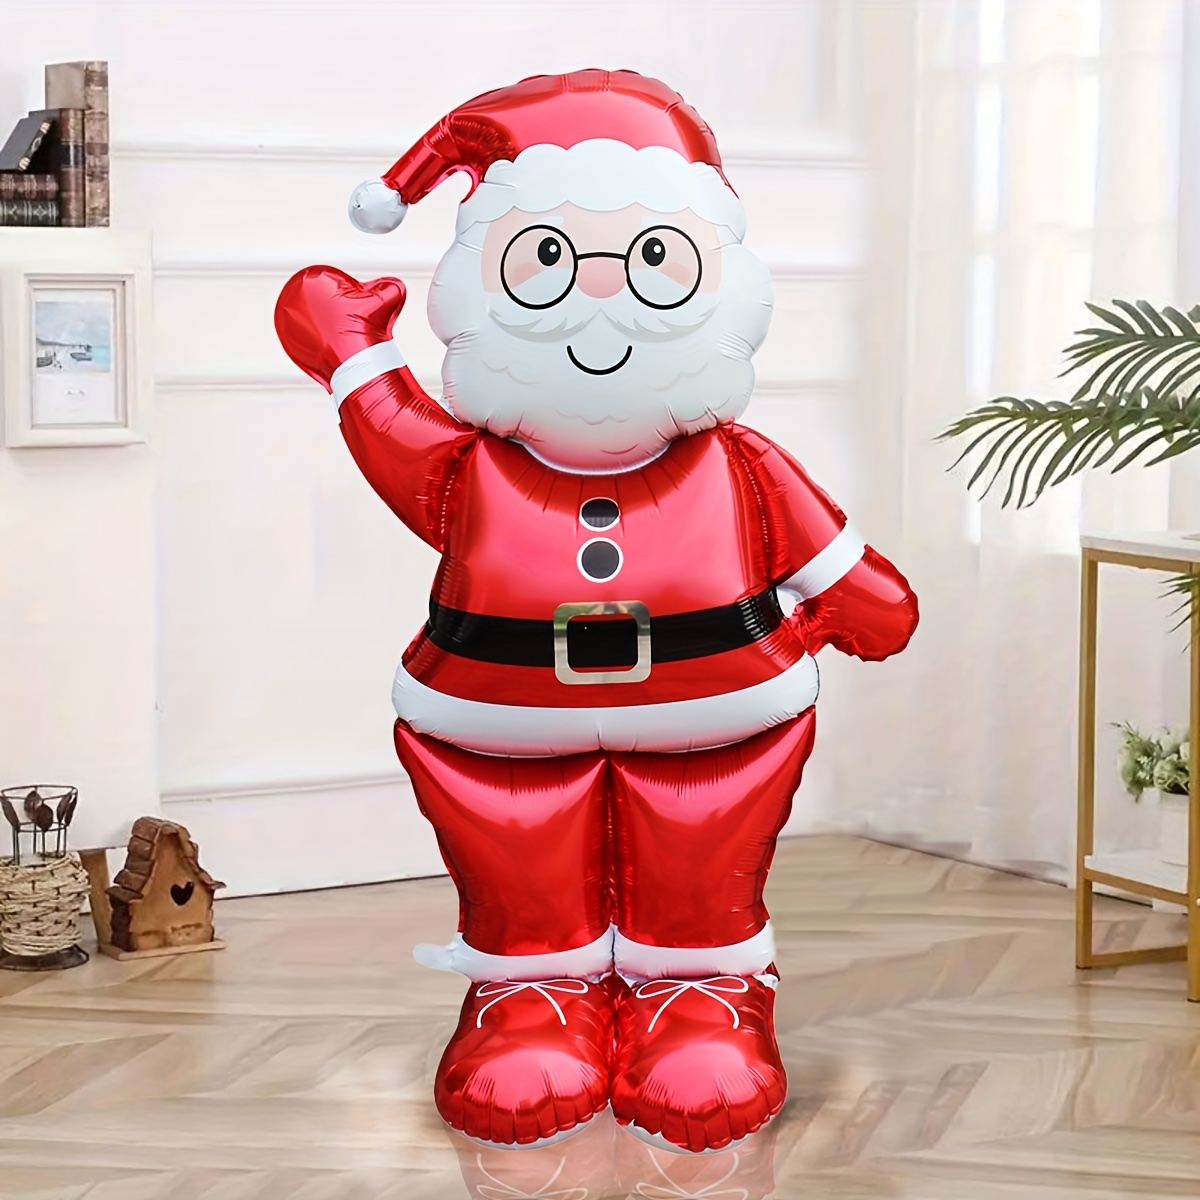 

1pc Large Santa Claus Aluminum Foil Balloon 61-inch - Perfect For Christmas Party Decoration And Themed Events, Suitable For New Year & Seasonal Celebrations, No Electricity Needed, For Ages 14+